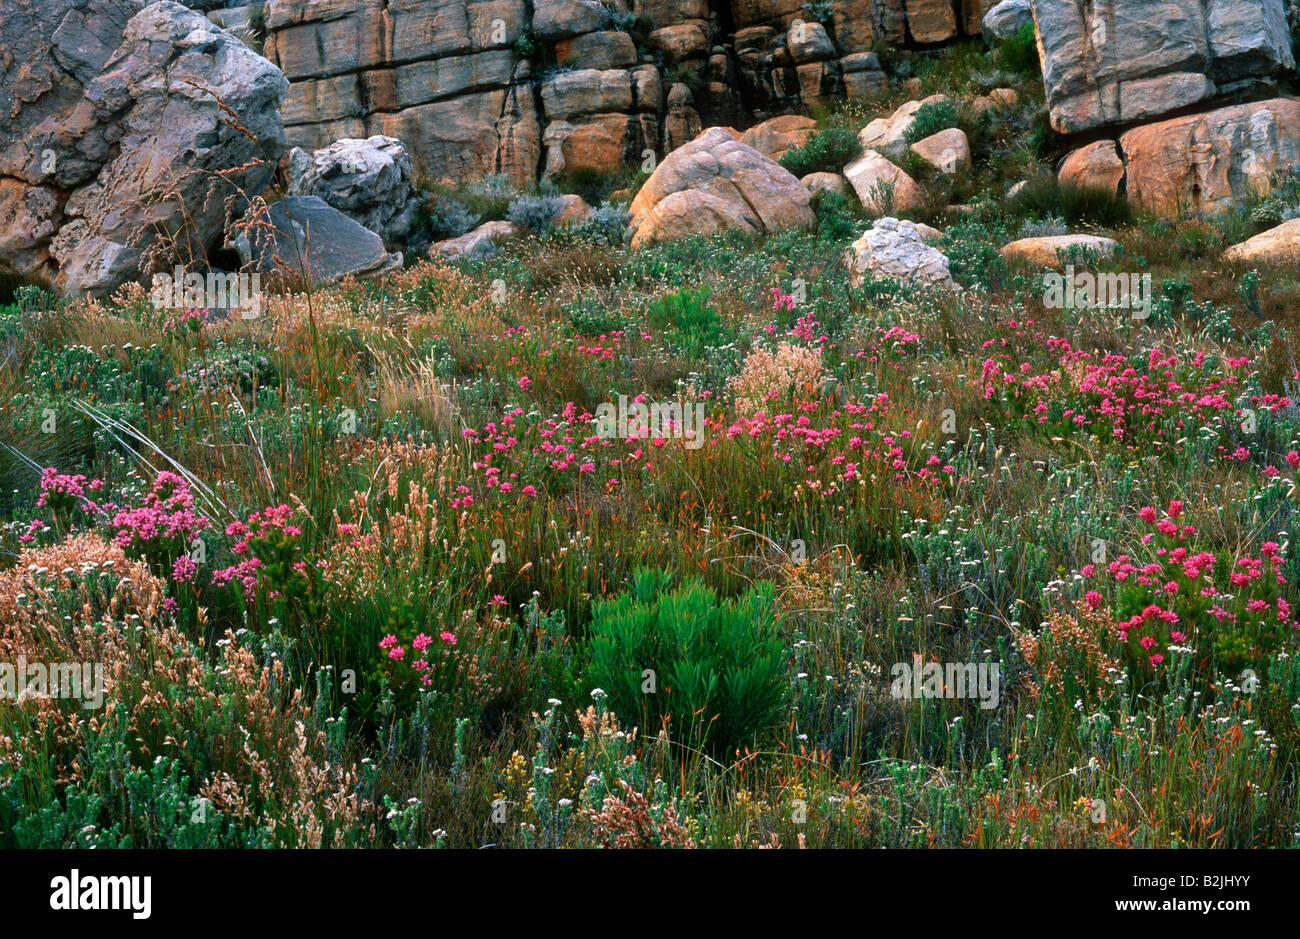 Flowering fynbos and sandstone blocks in the Cederberg mountain range of South Africa's Western Cape Province. Stock Photo